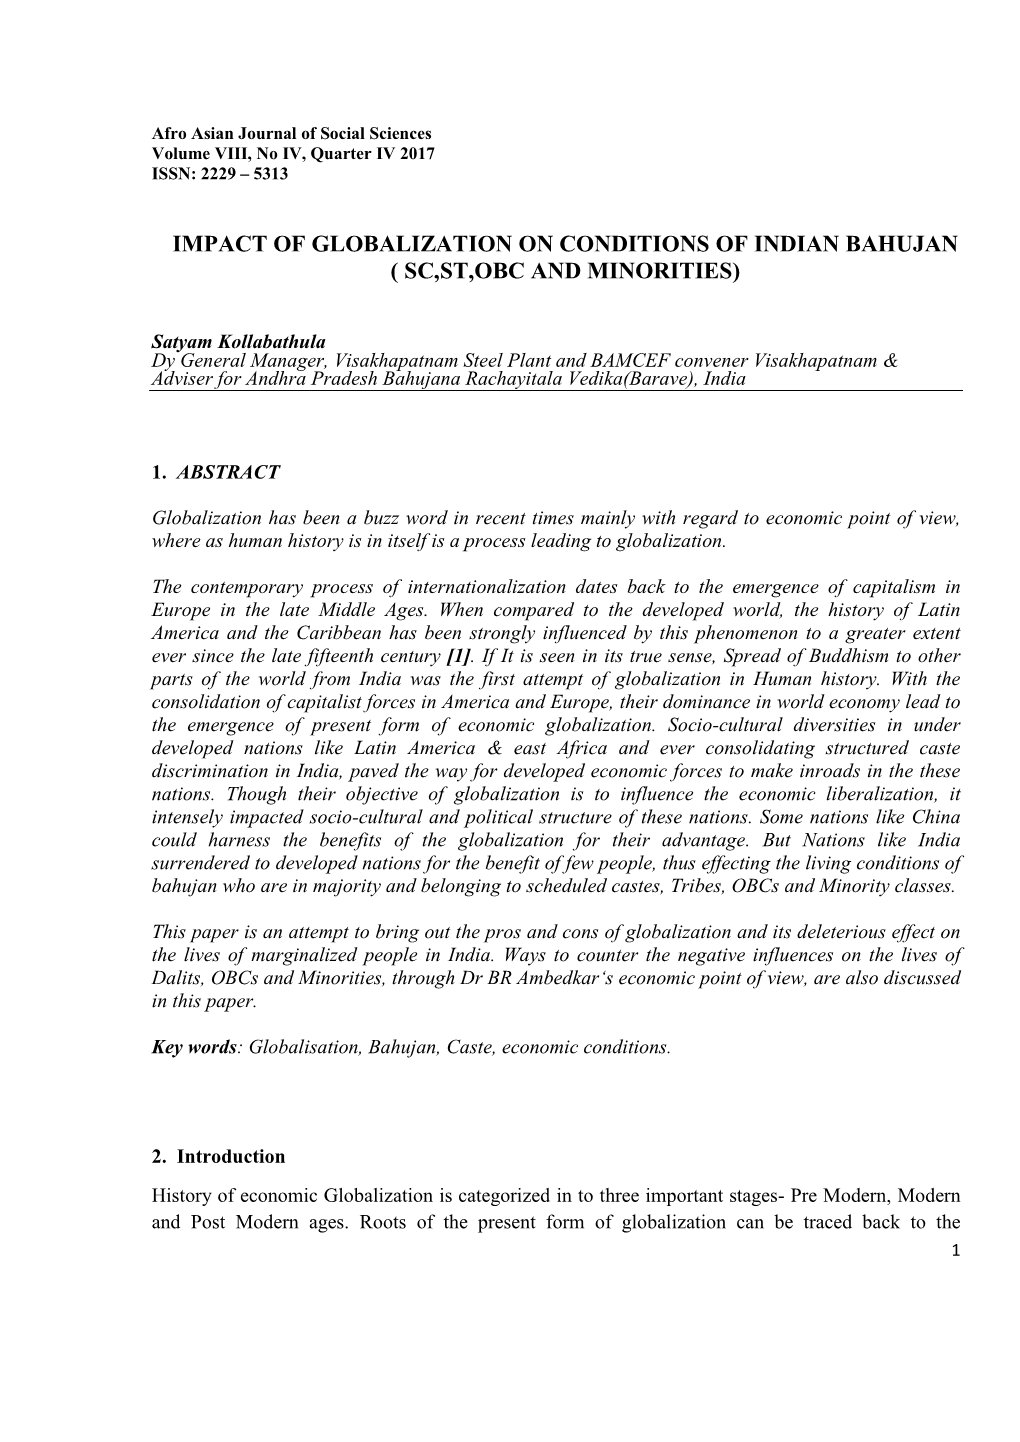 Impact of Globalization on Conditions of Indian Bahujan ( Sc,St,Obc and Minorities)